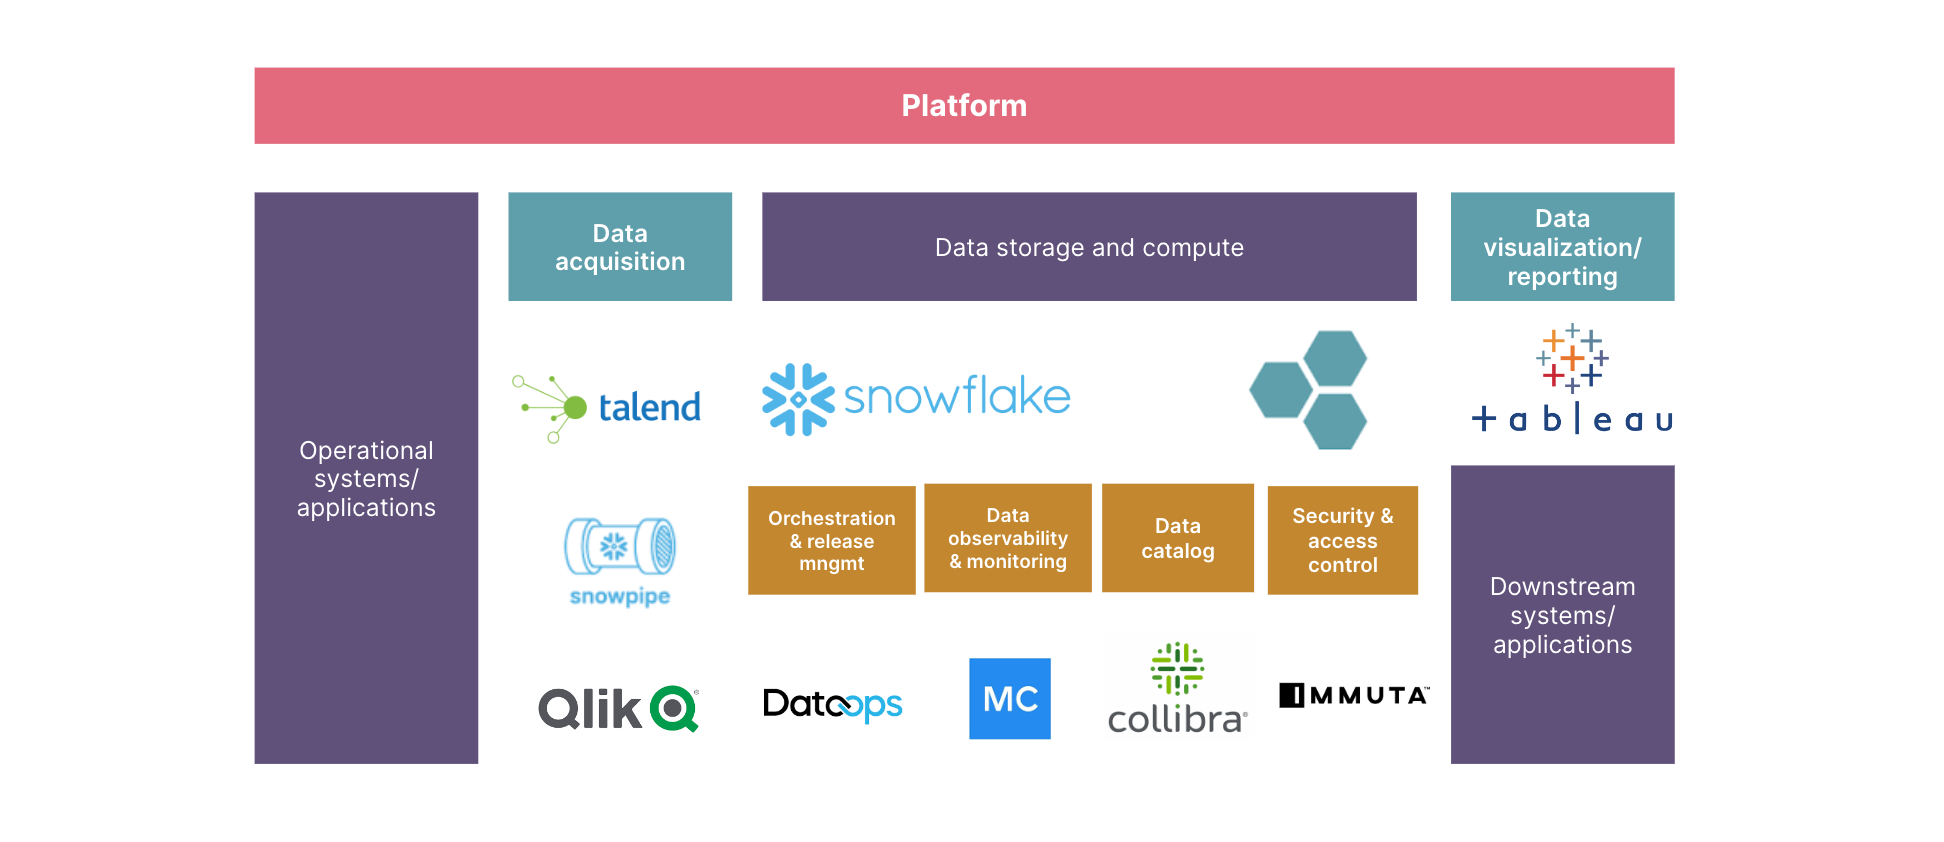 a Data platform stack. The data platform stack integrates with Operations systems/application via Data acquisition layer consisting of Talend,Snowpipe and Qlik replicate. Snowflake is used for data storage and computation. Dataops.live is used for orchestration and release management. Monte Carlo Platform is used for data observability and monitoring. Collibra is used for data cataloging. Immuta is used for managing security and access control. Tableau is used for Data visualization and reporting. The platform integrated with several downstream systems/applications.